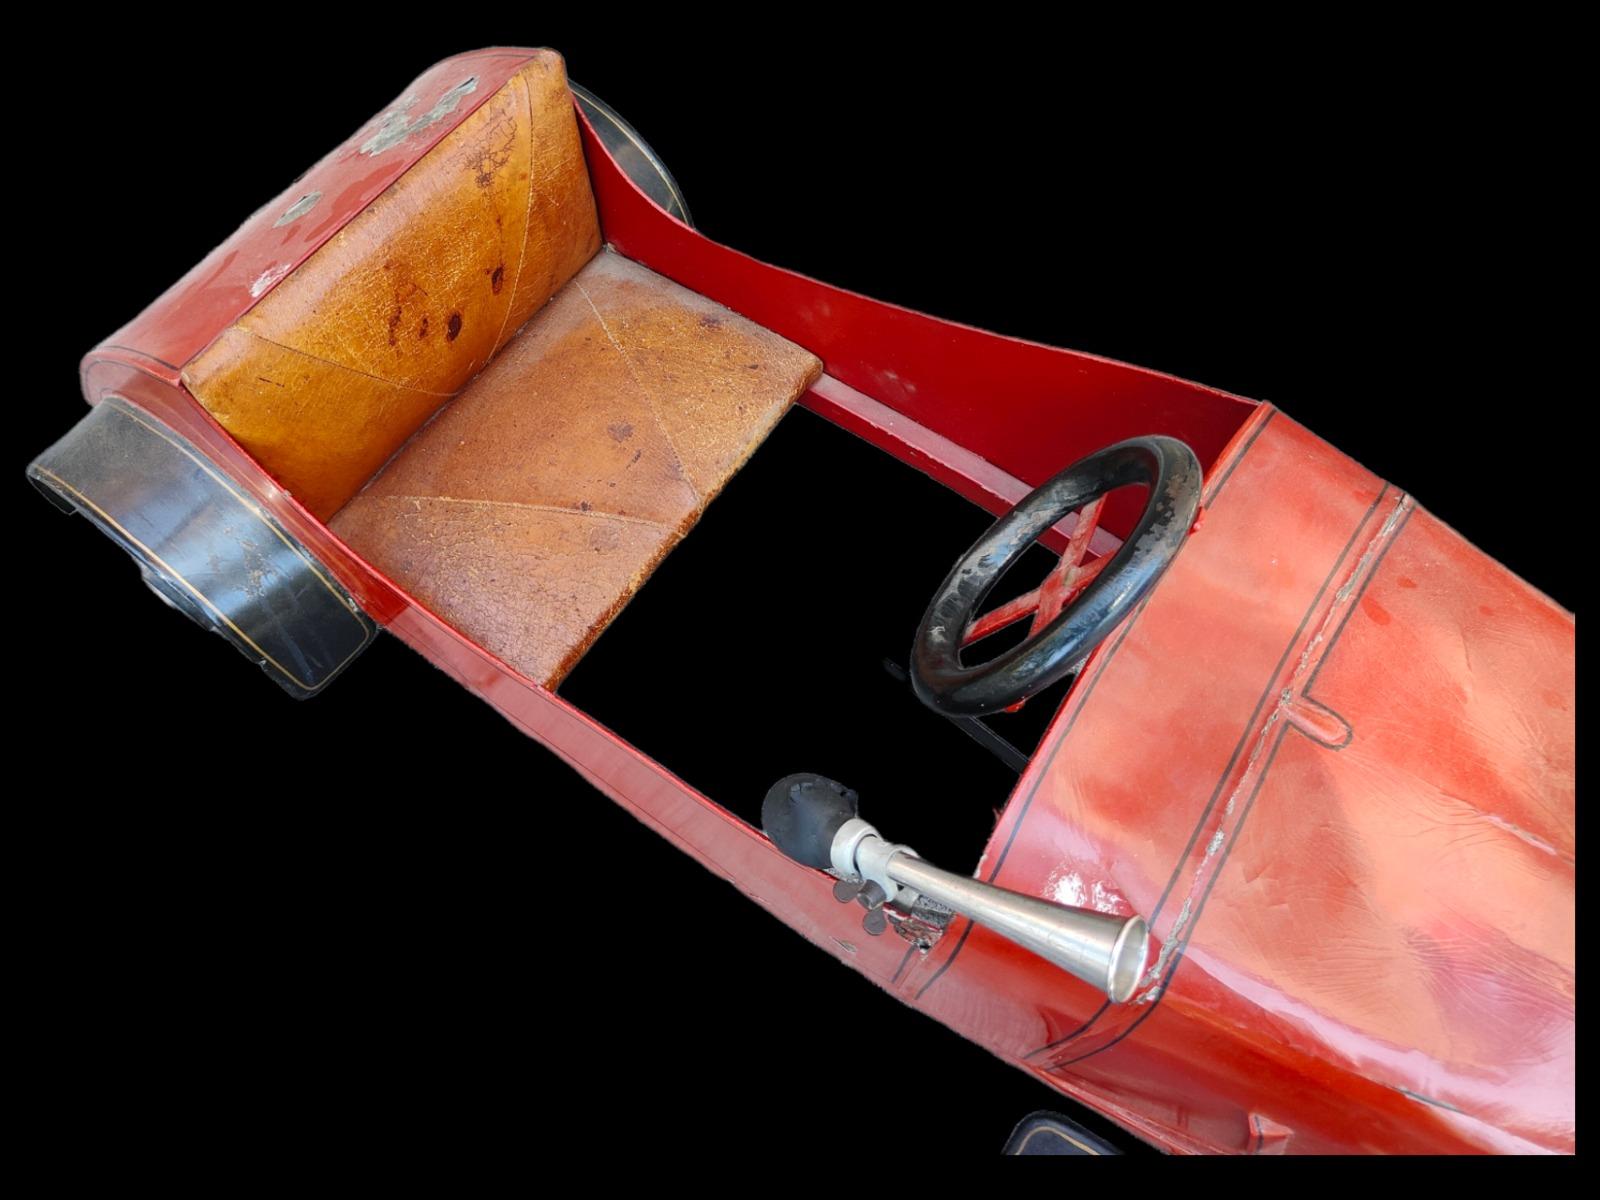 Pedal car from the 30s, Denia beautiful pedal car it is manufactured in denia in the decade of the 30s although it has no visible marks or label, it looks like it is a car manufactured by the company La Vasco- Dianense Lapeyra Y Fons sl in one of